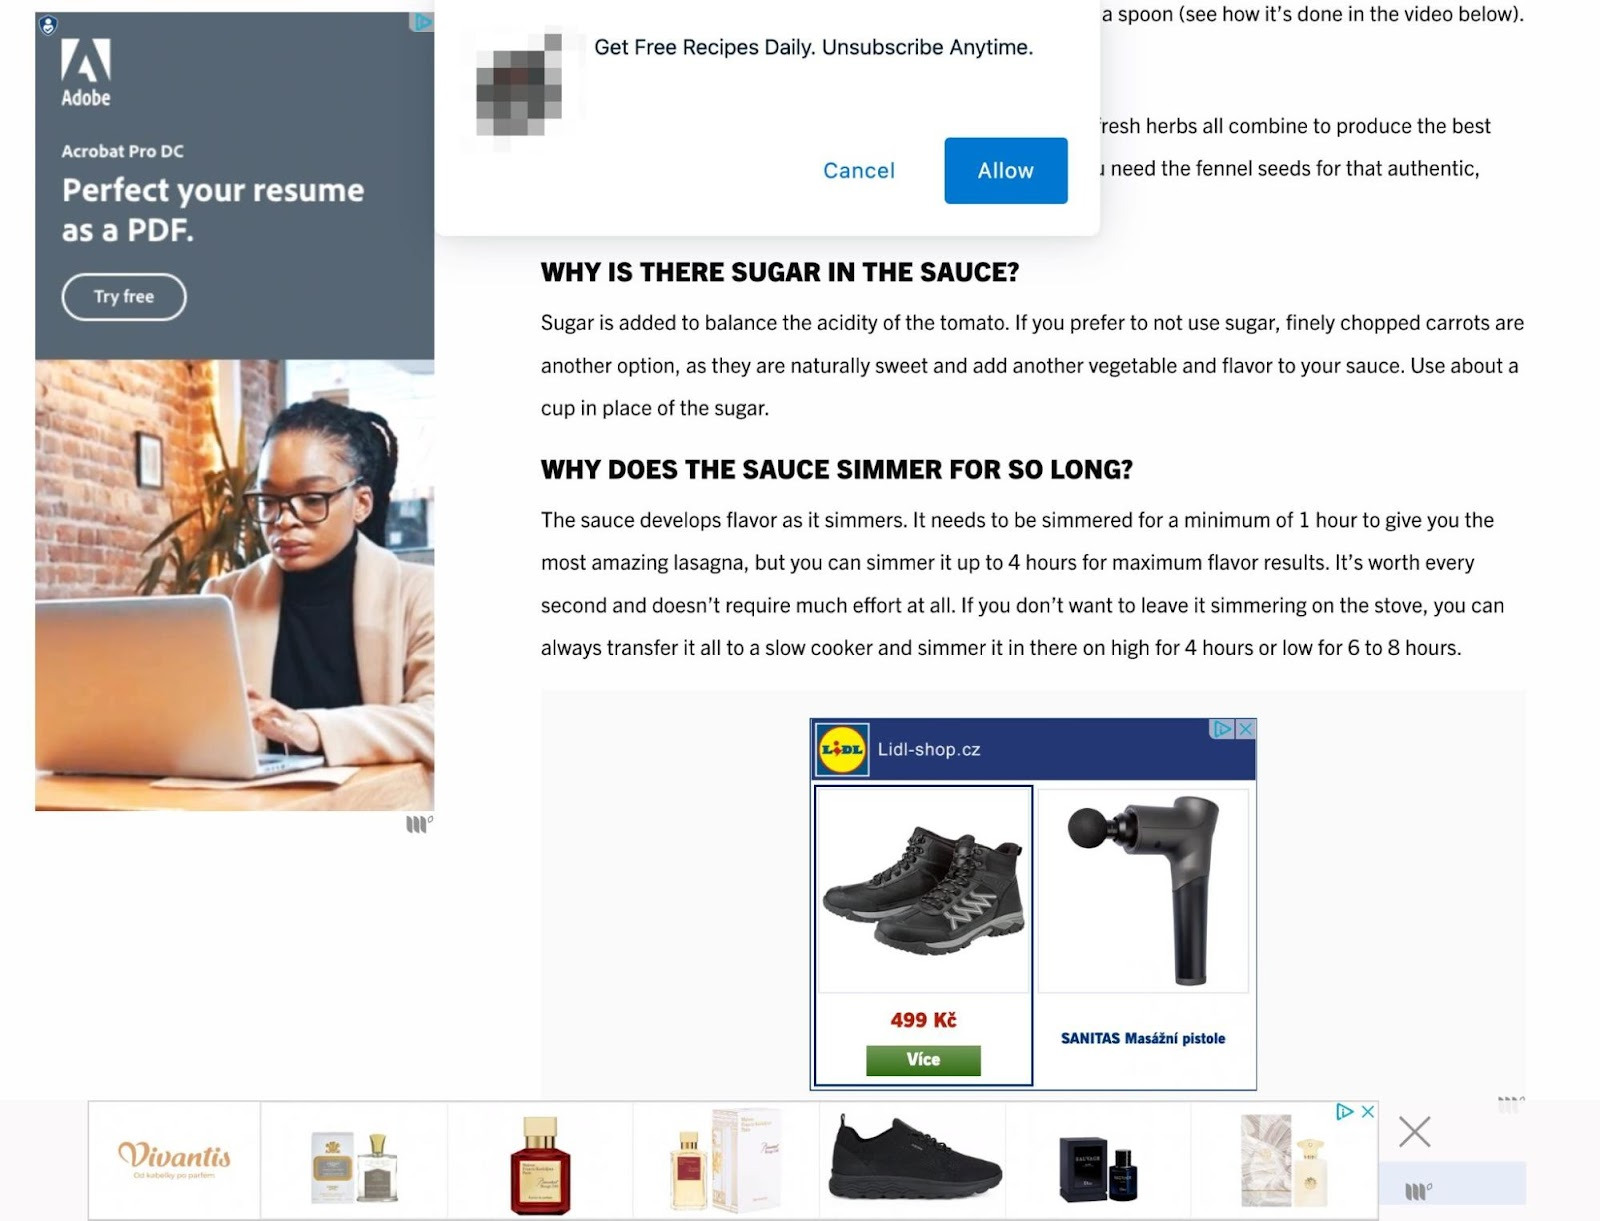 Example of a page with too many ads and pop-ups